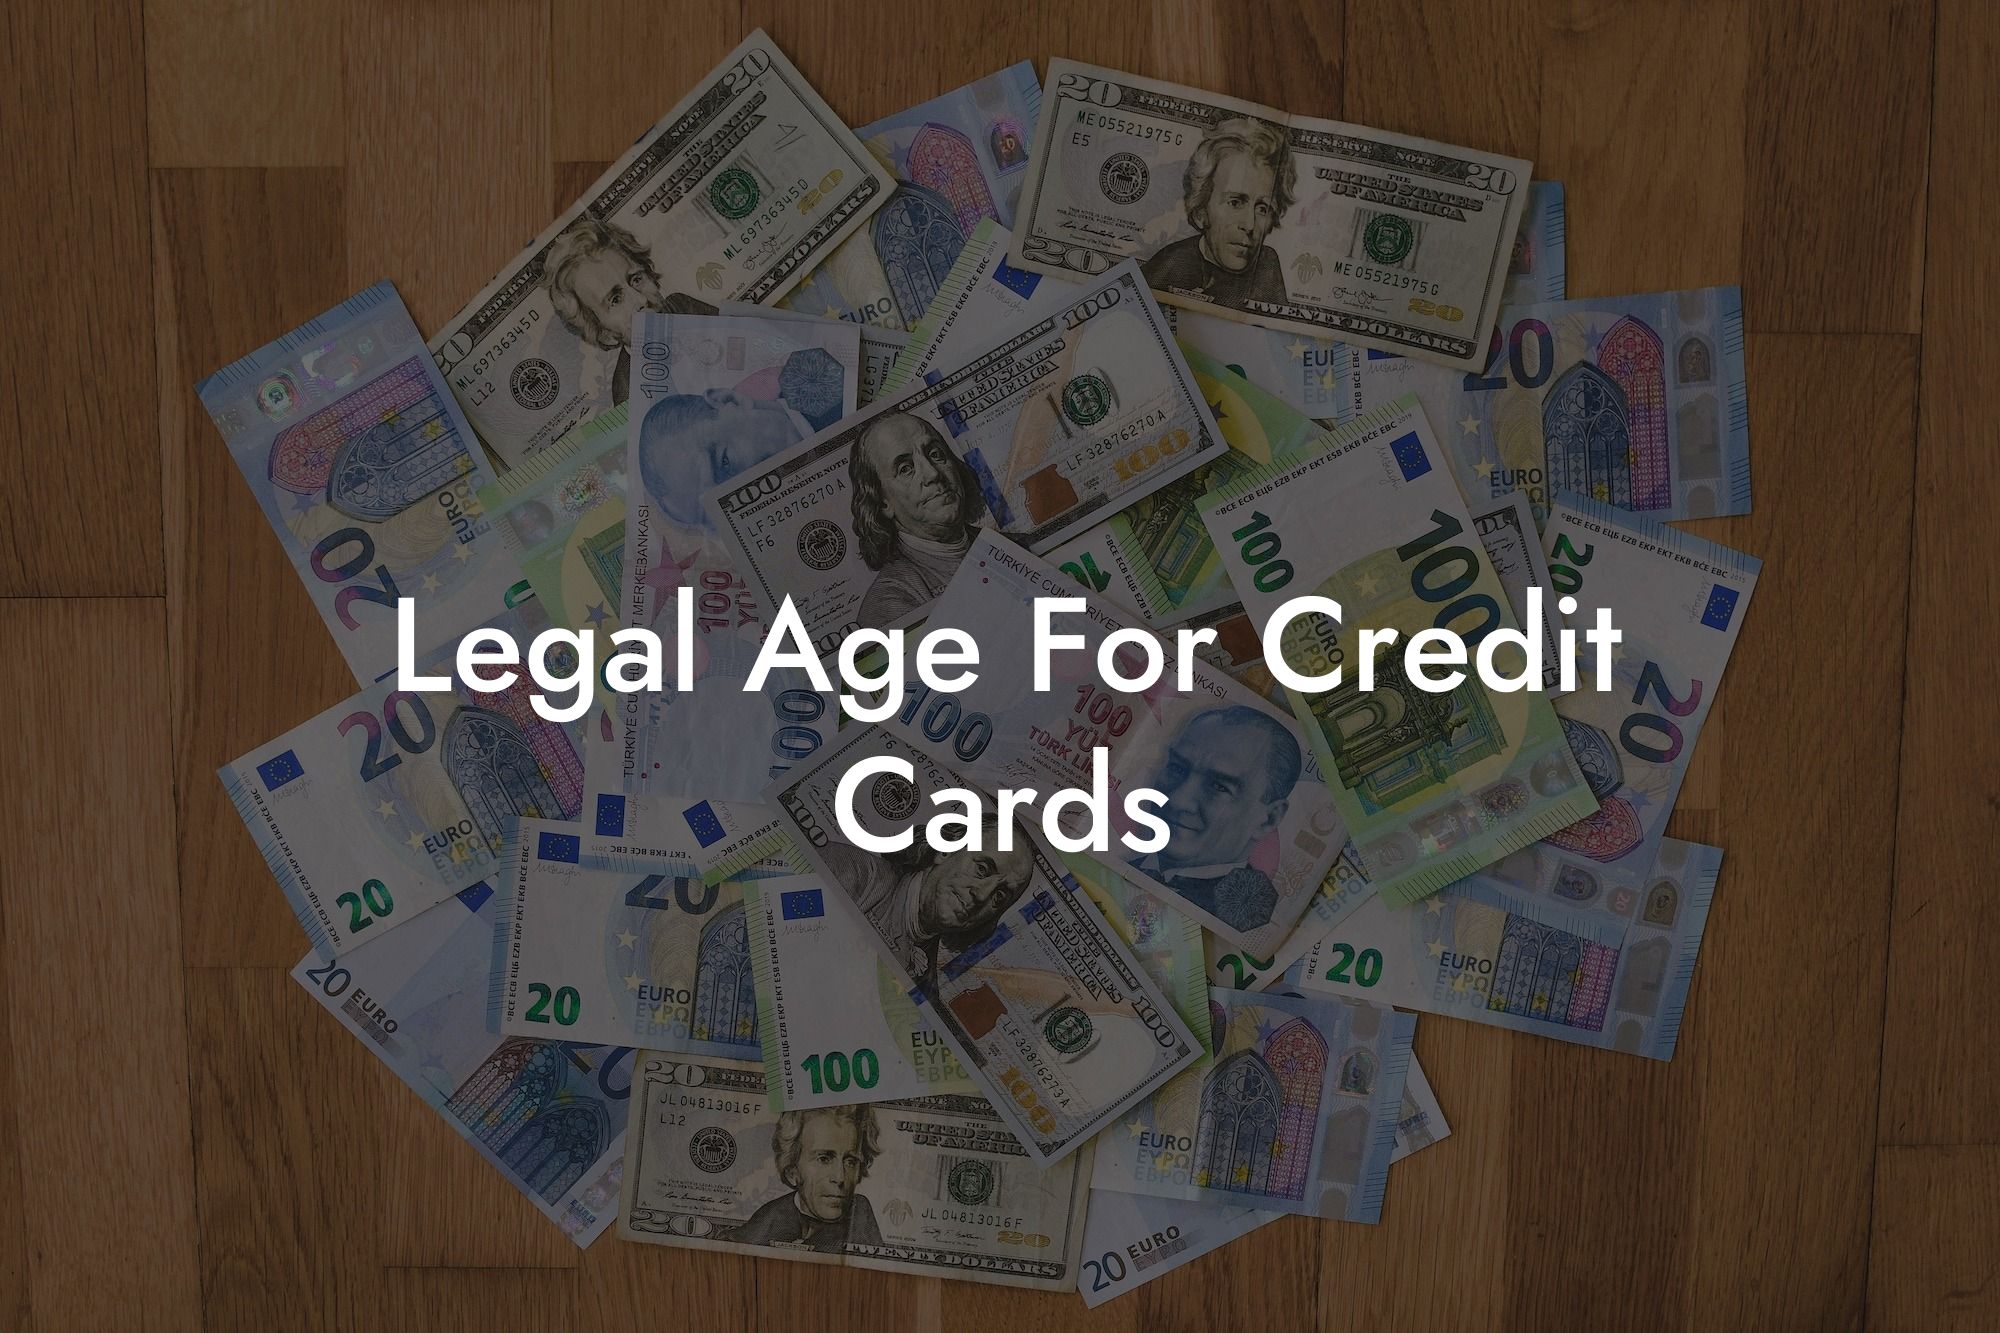 Legal Age For Credit Cards